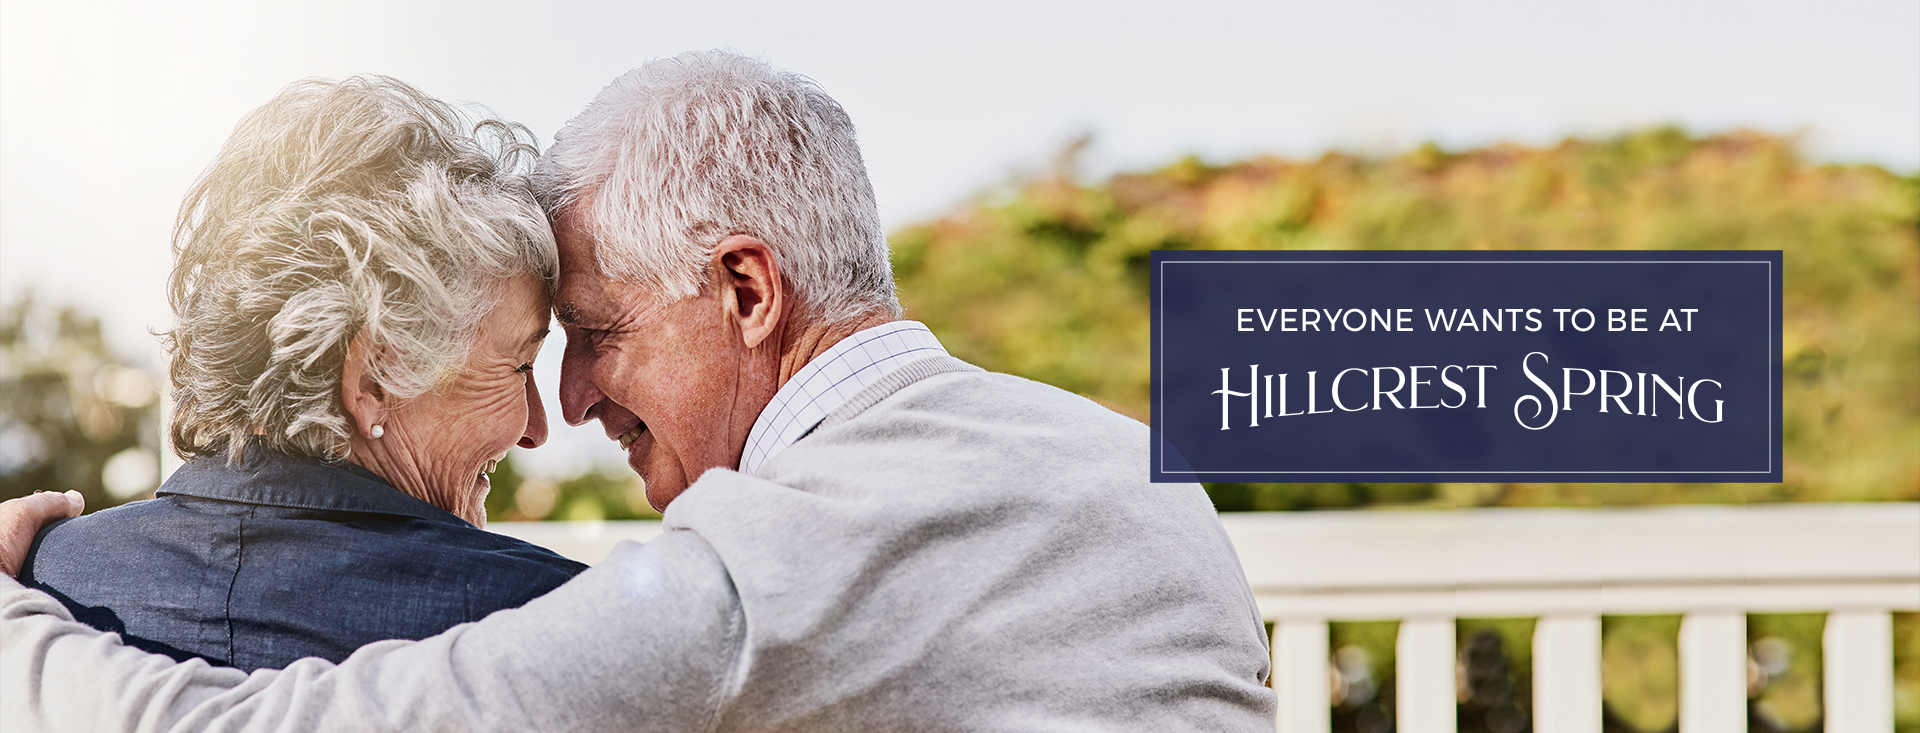 Hillcrest Spring | Assisted Living Community In Amsterdam, NY